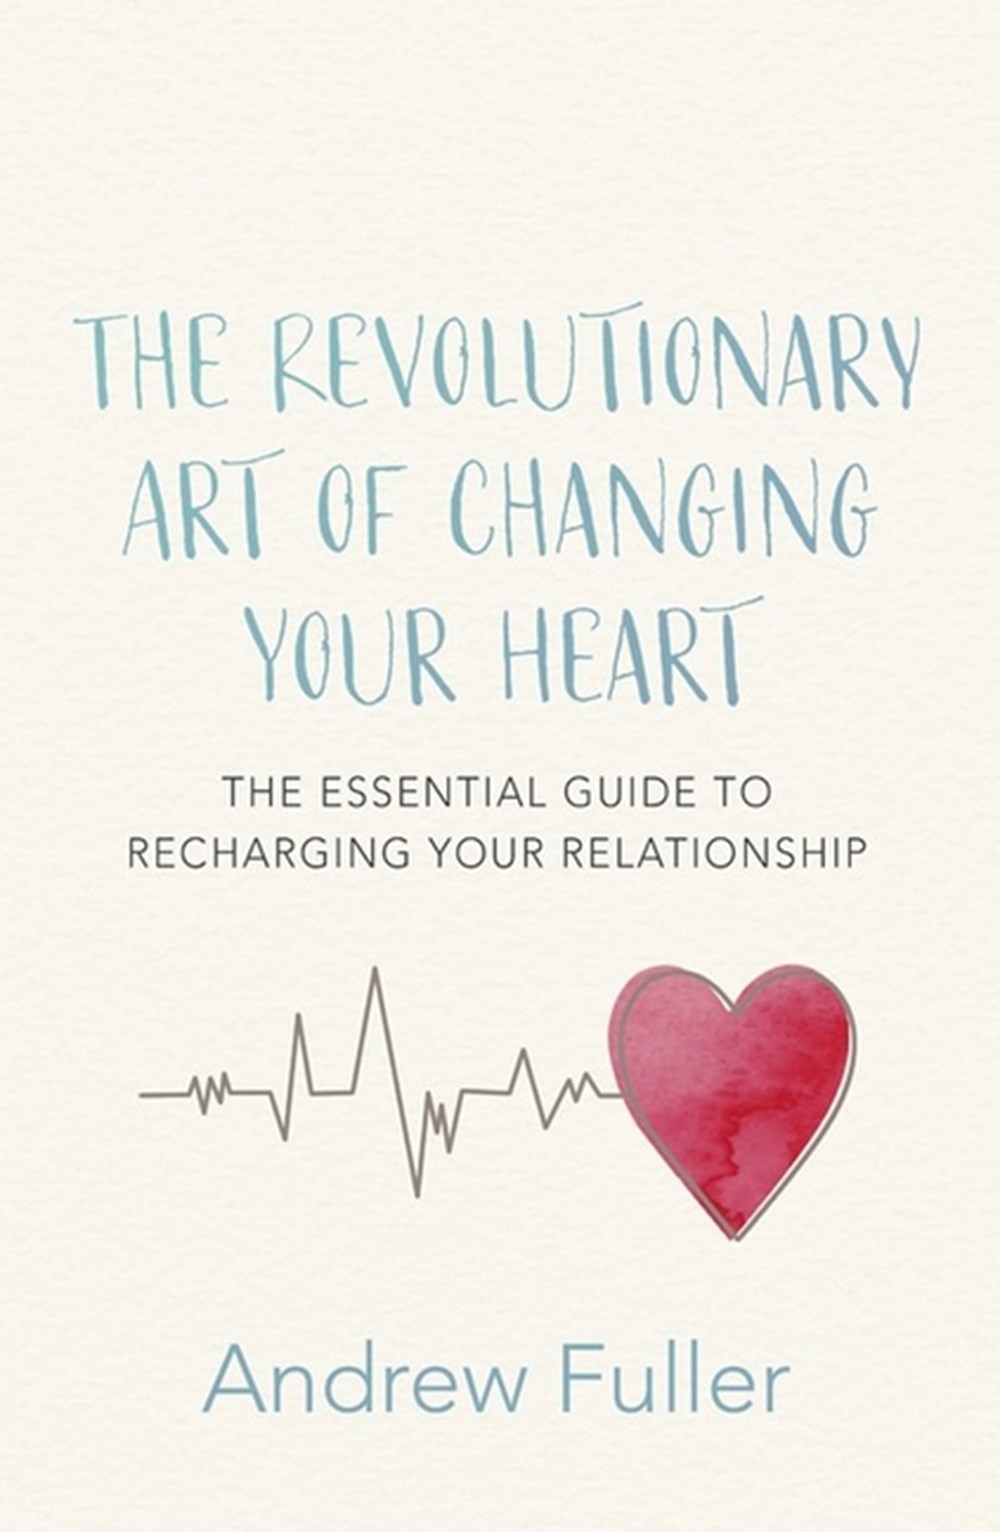 Revolutionary Art of Changing Your Heart The Essential Guide to Recharging Your Relationship